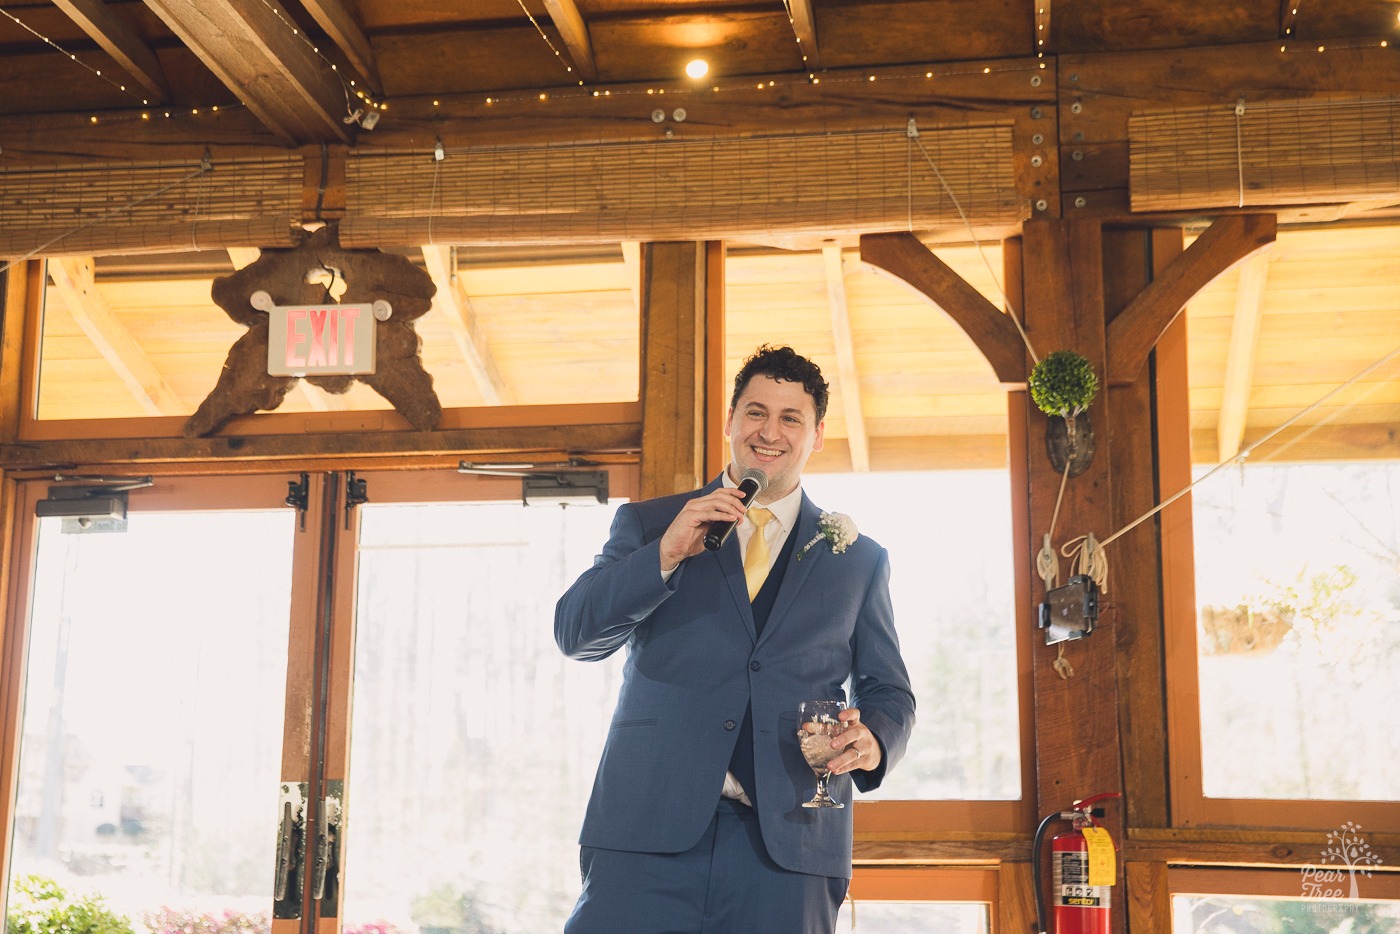 Another brother of the bride giving a toast and smiling